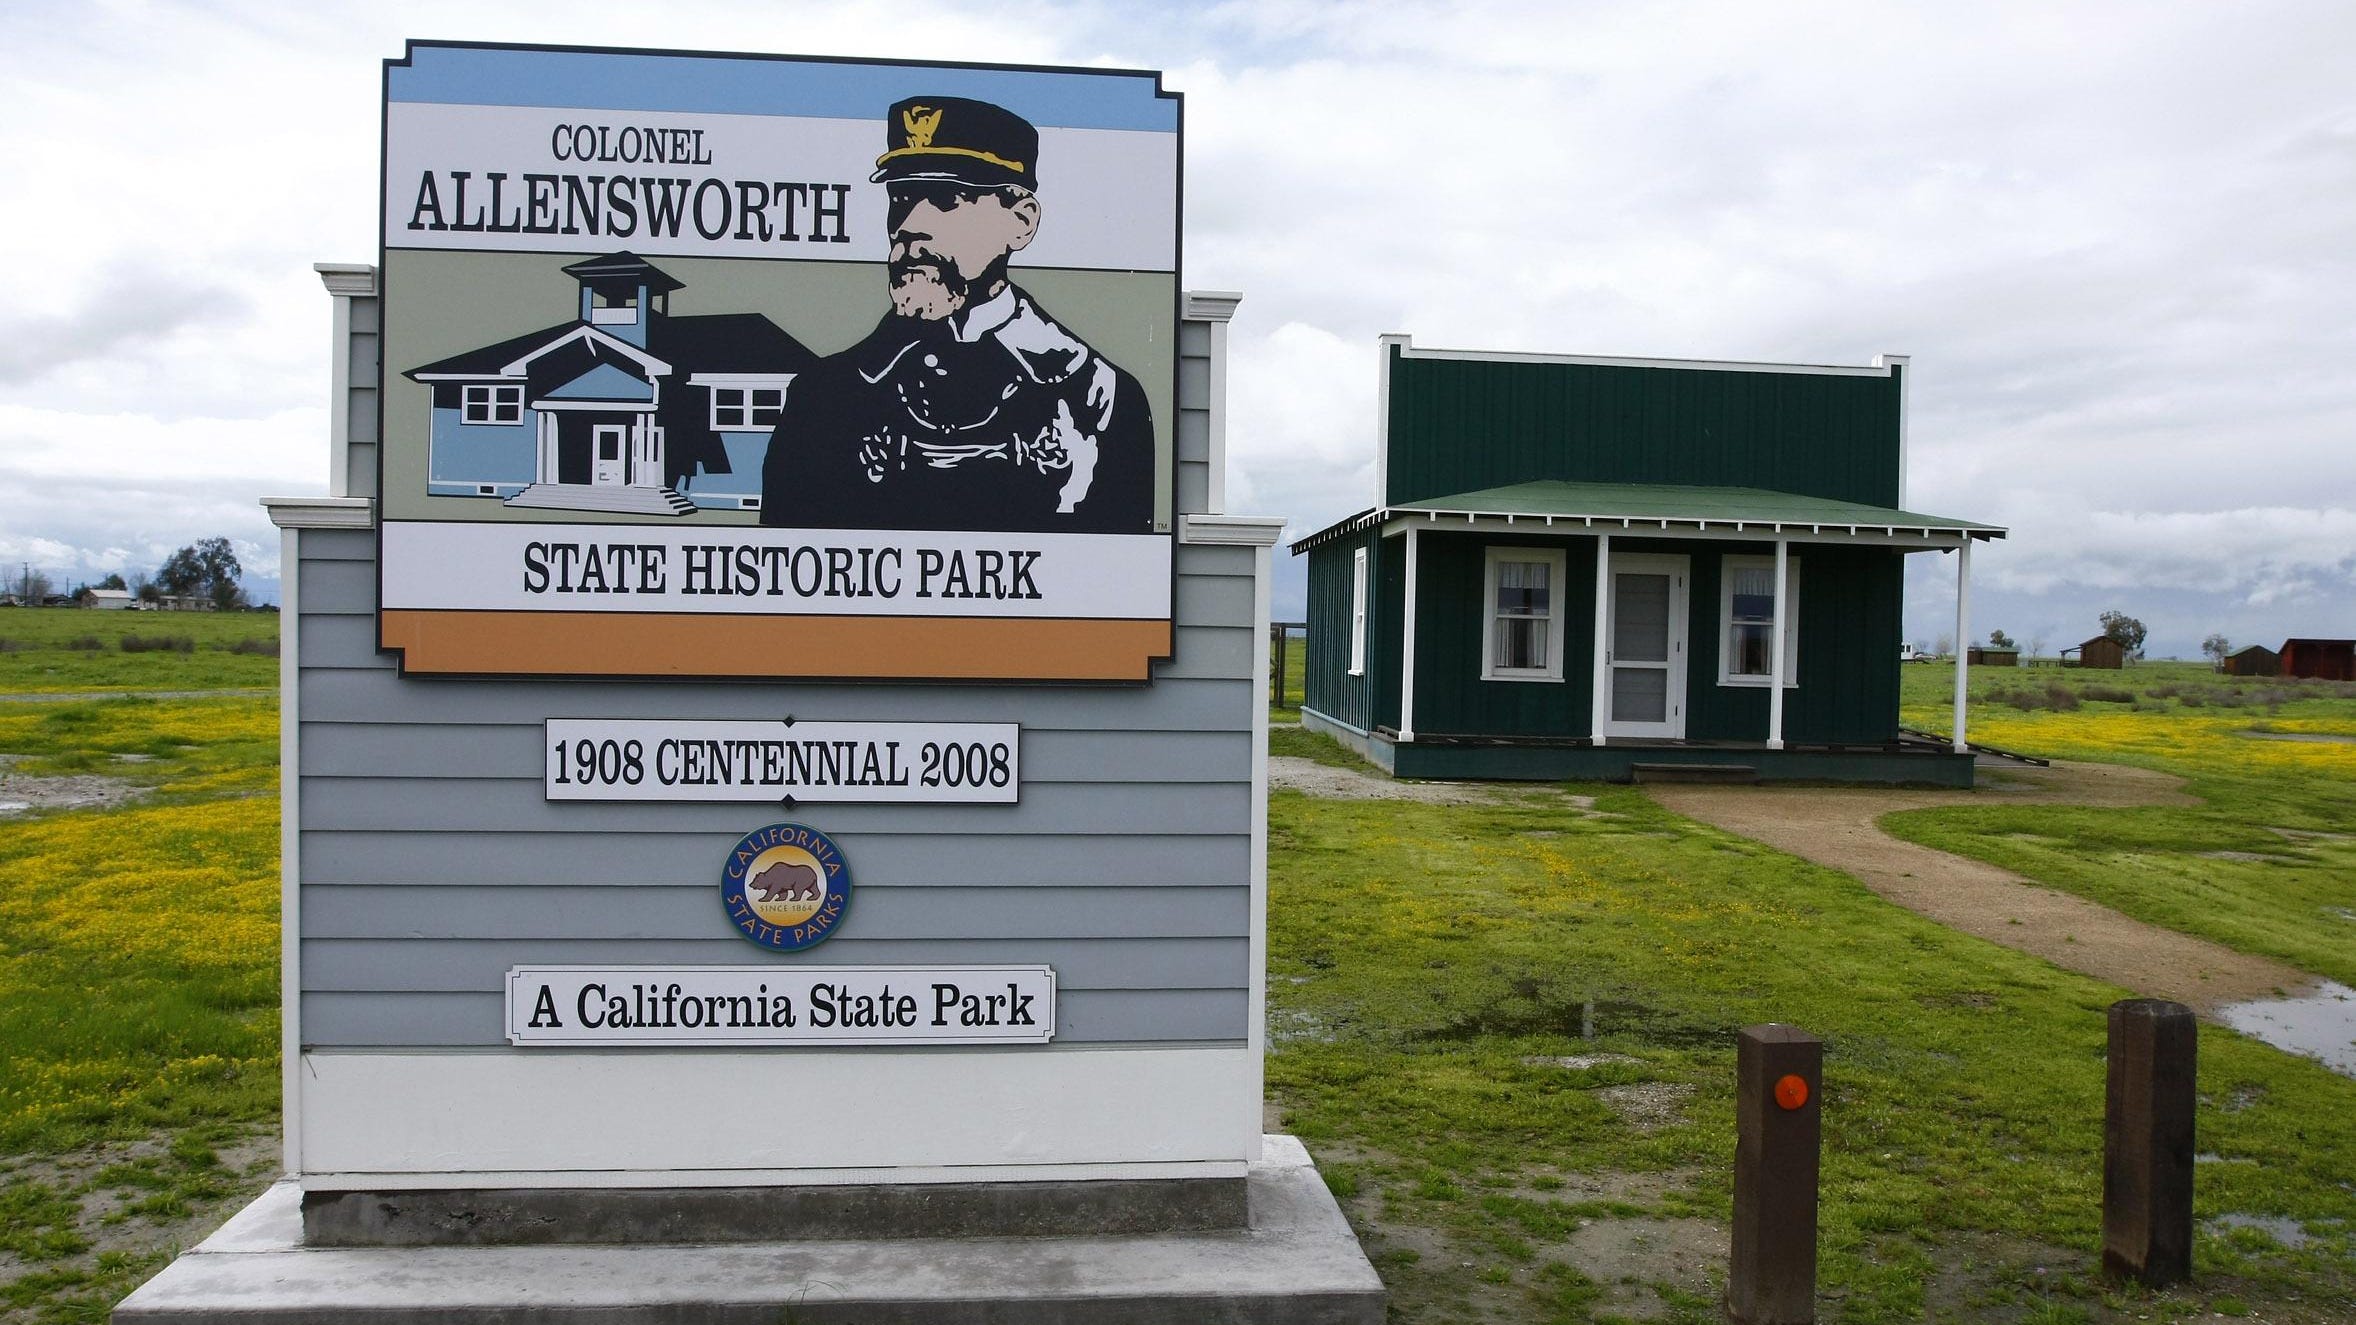 The establishment of Colonel Allensworth State Historic Park is a testament to the perseverance and resilience of African Americans who have faced centuries of oppression and discrimination in the United States. 